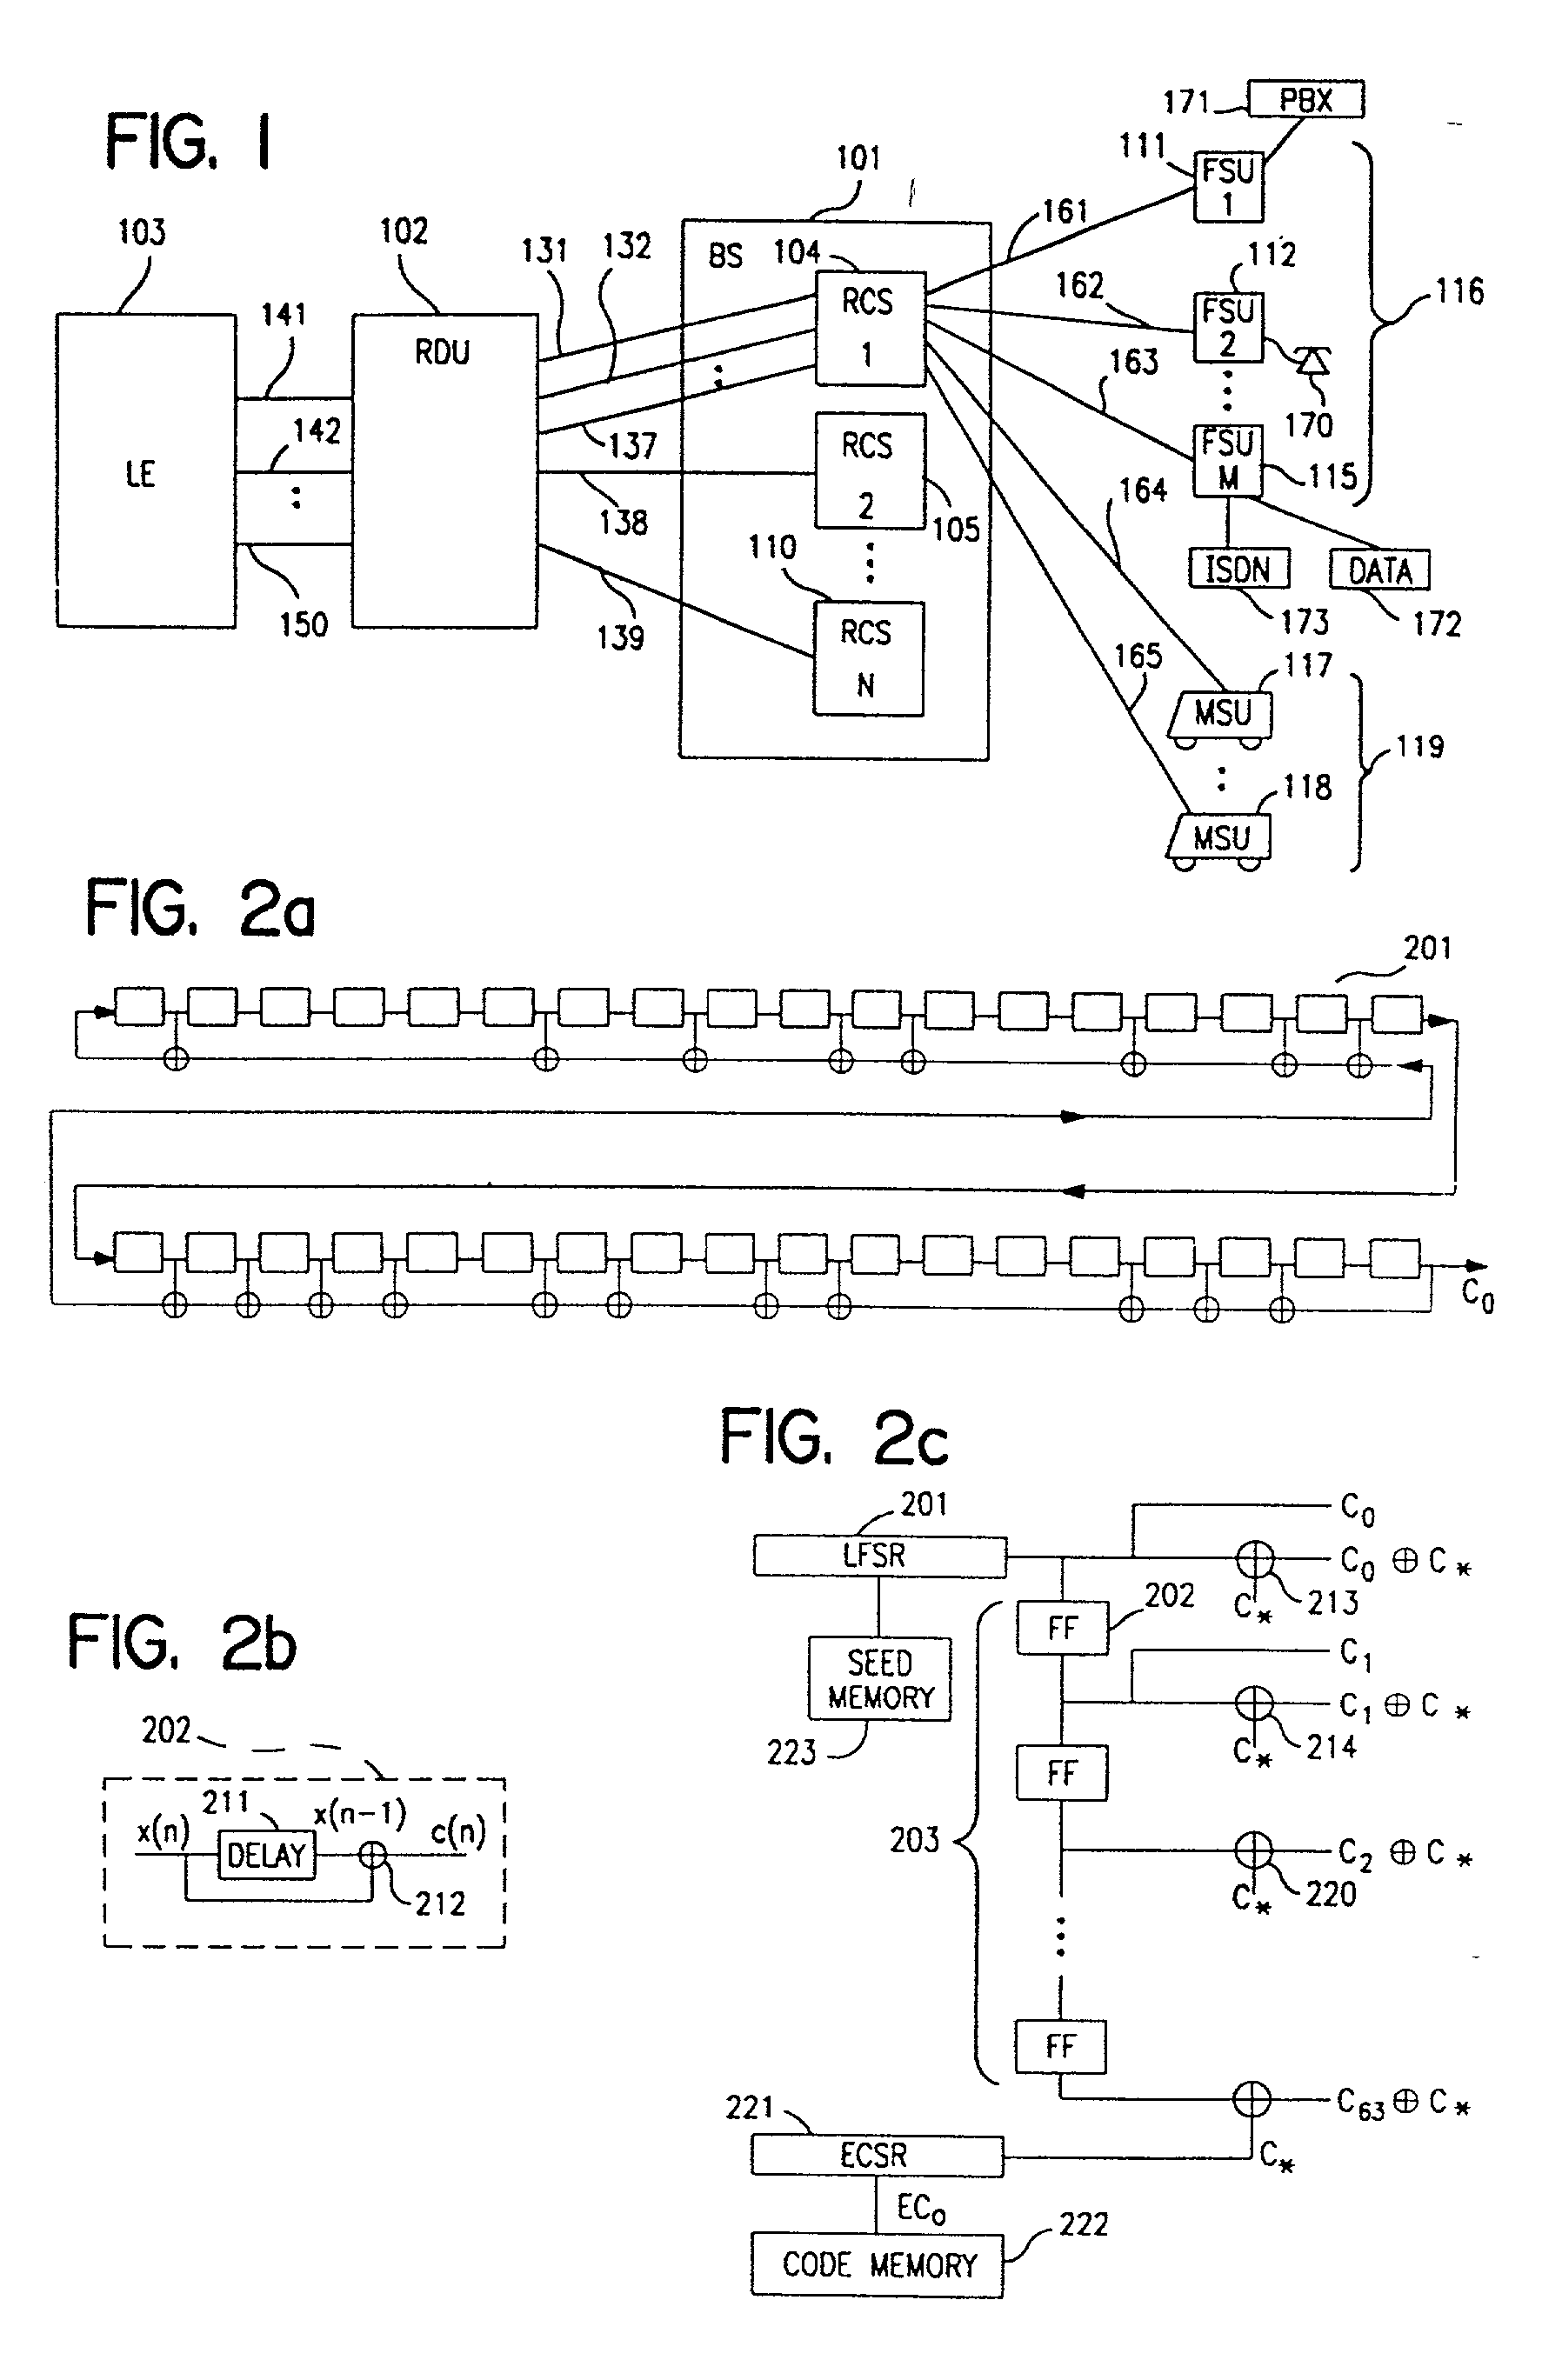 Initial power control for spread-spectrum communications